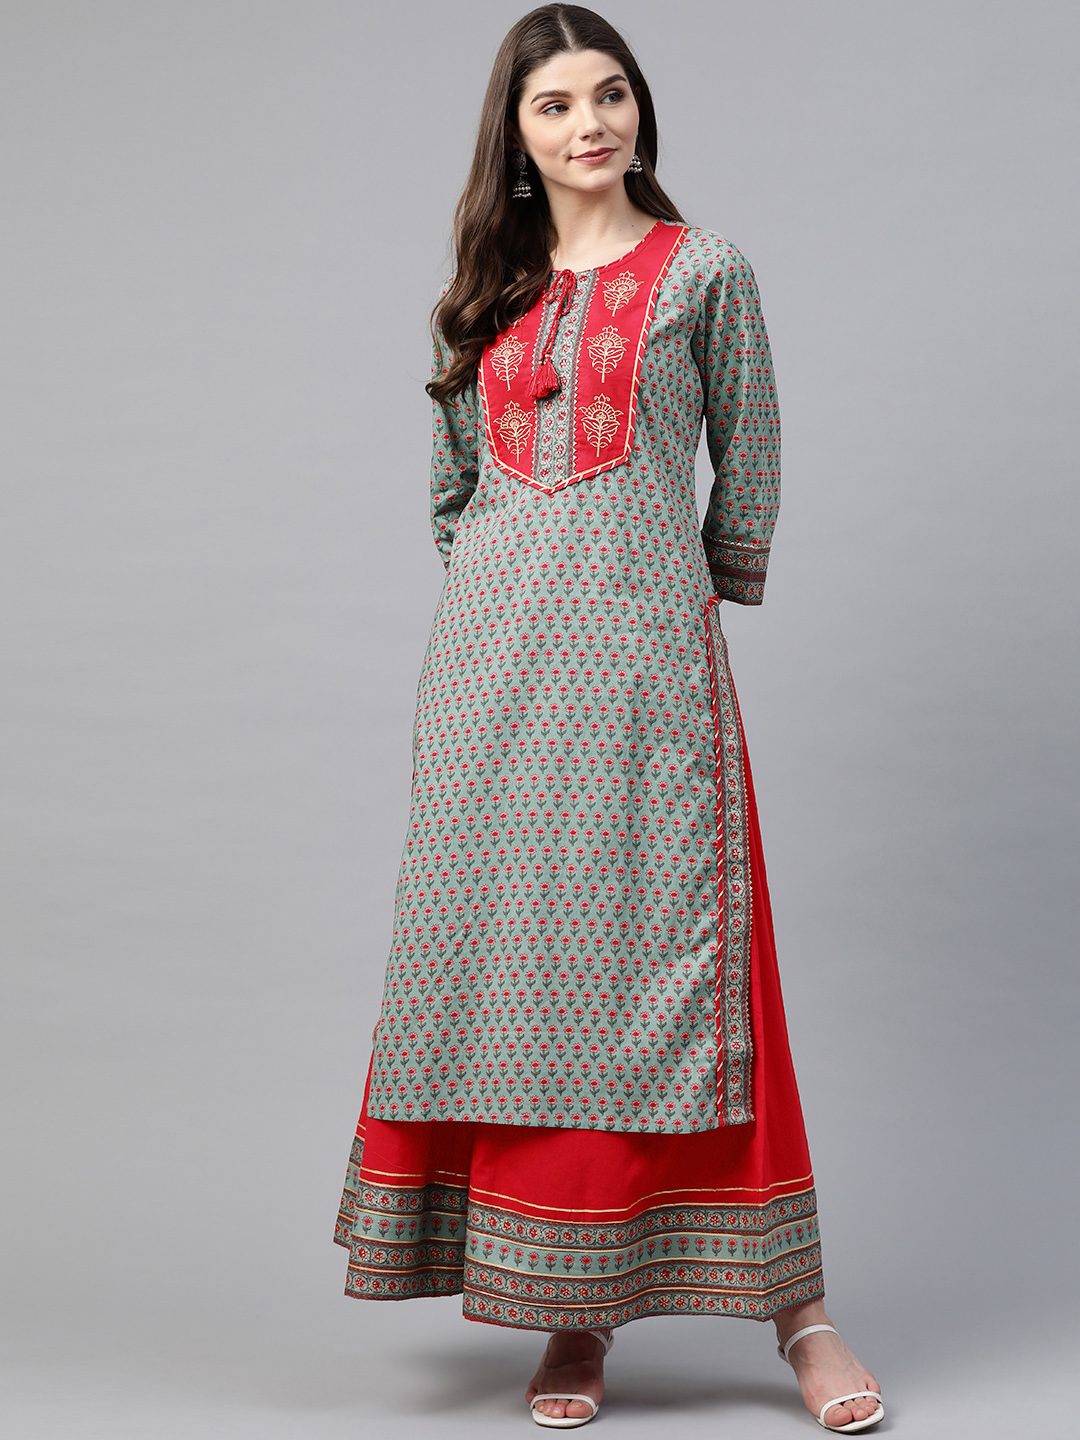 Buy DIVINATION Western Rayon Kurtis for Women Western Touch Printed Kurti  (Light Pink,Large) at Amazon.in